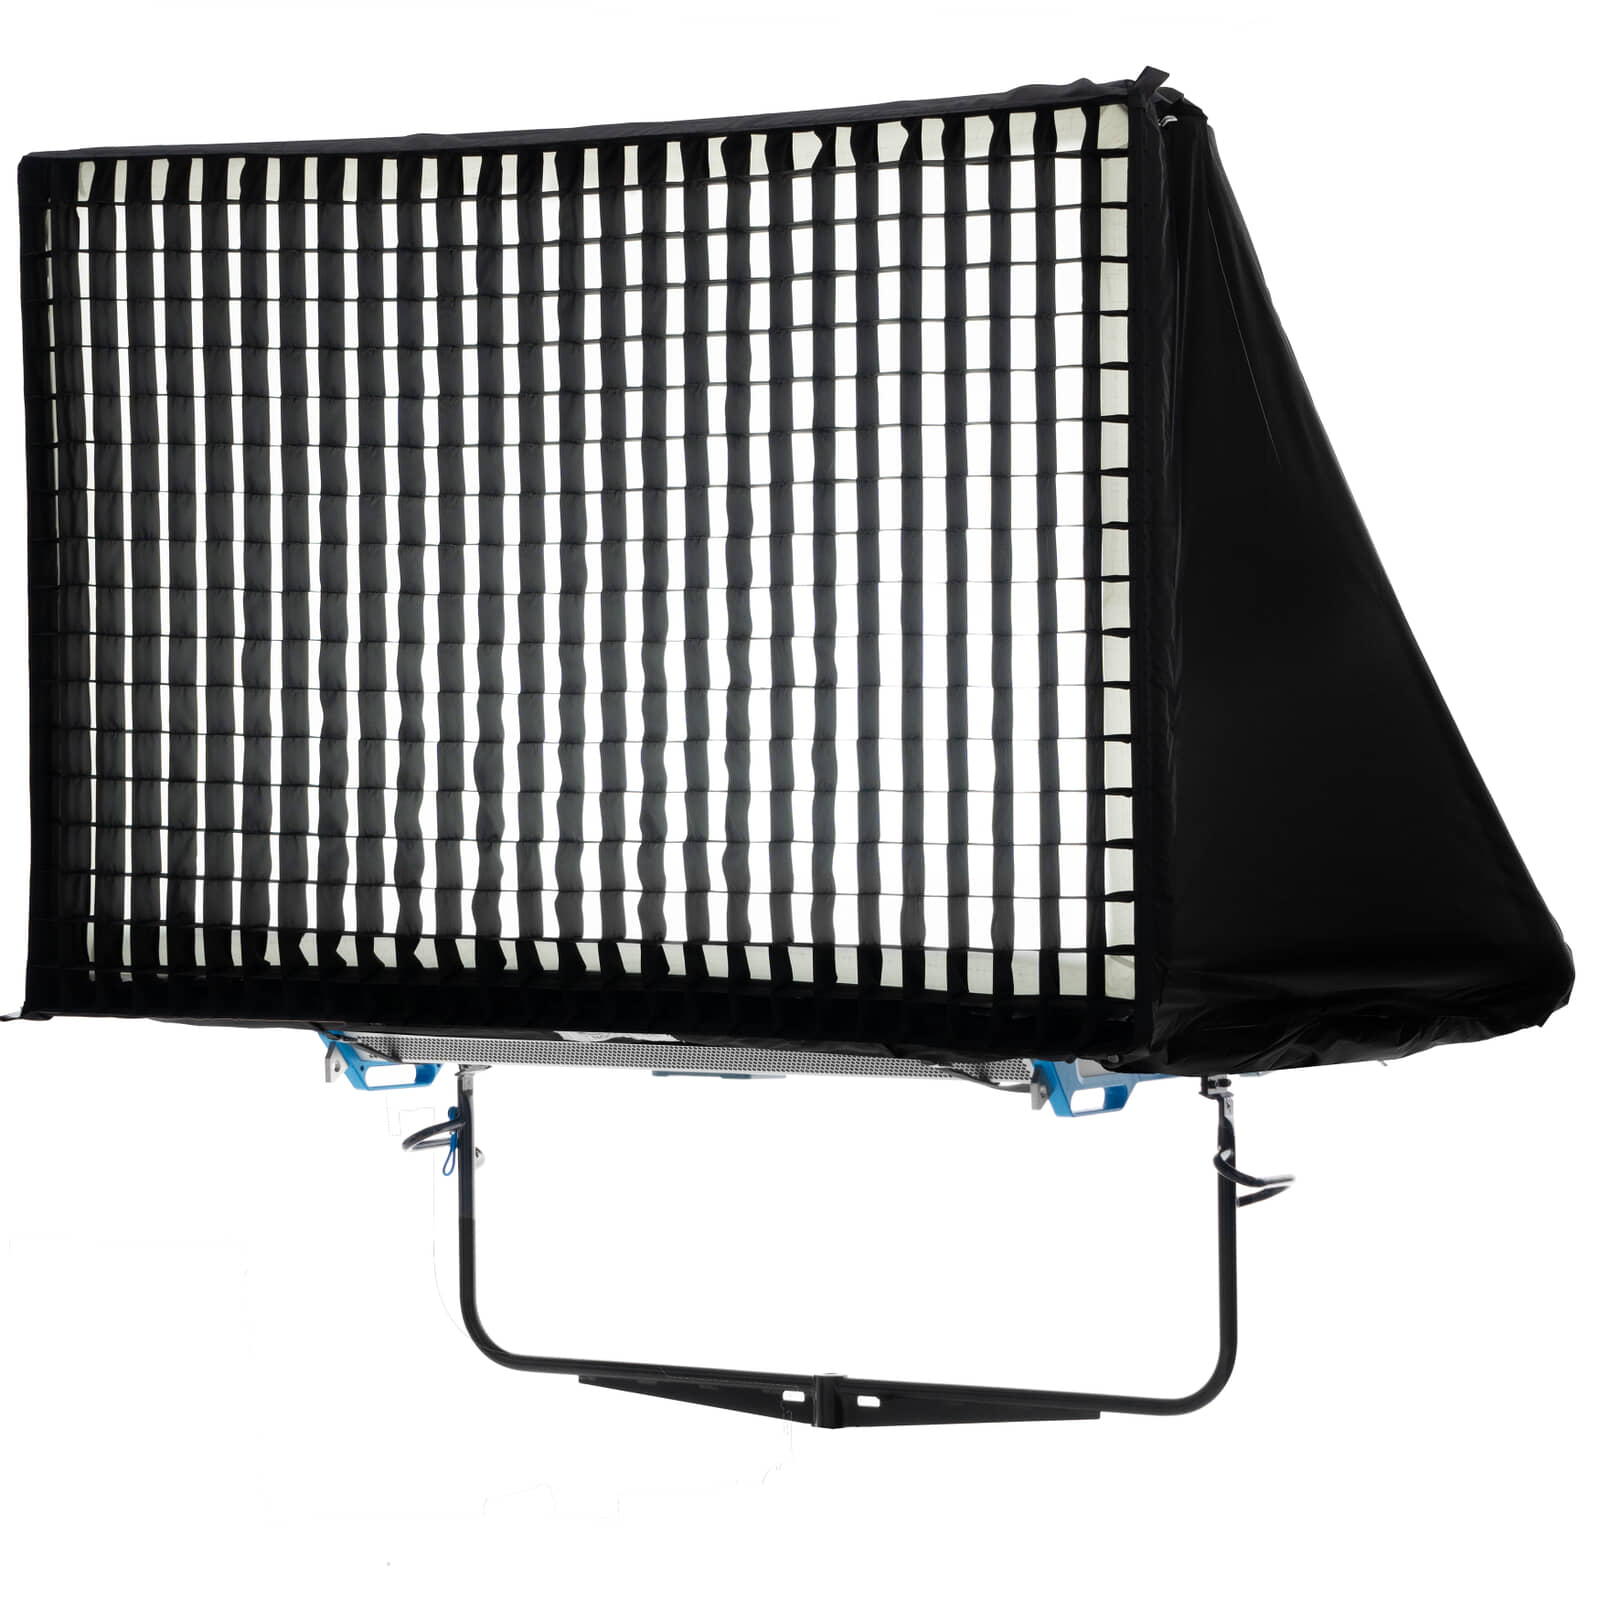 DoPchoice SNAPGRID® 40° for AIRGLOW 2x2 Booklight